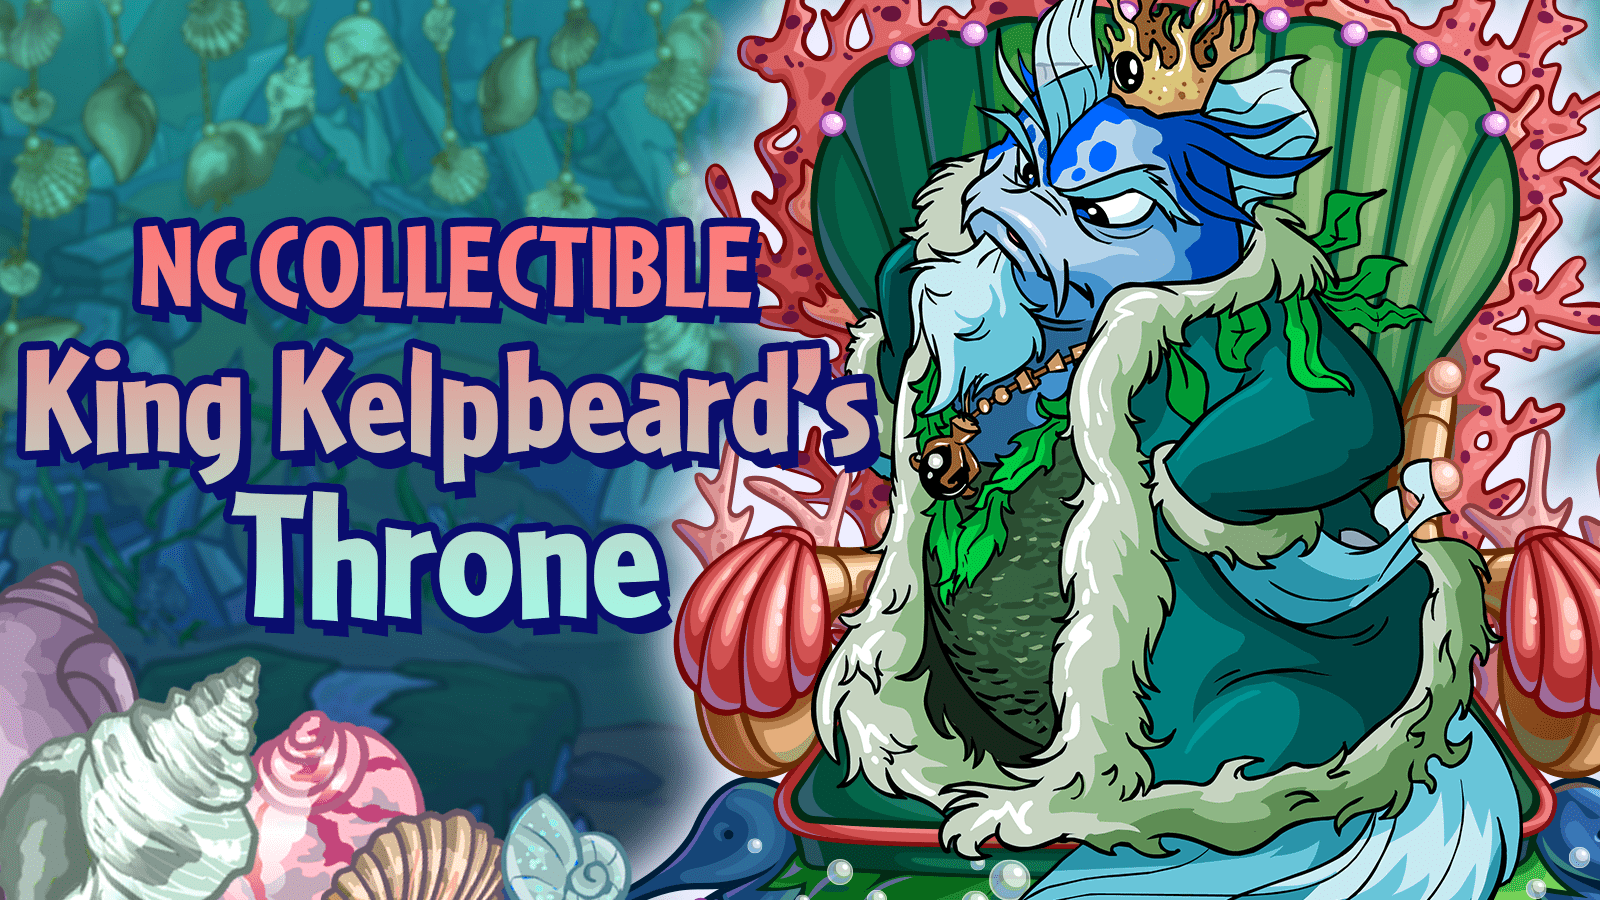 https://images.neopets.com/homepage/marquee/nccollectible_kelp_LINCB.png